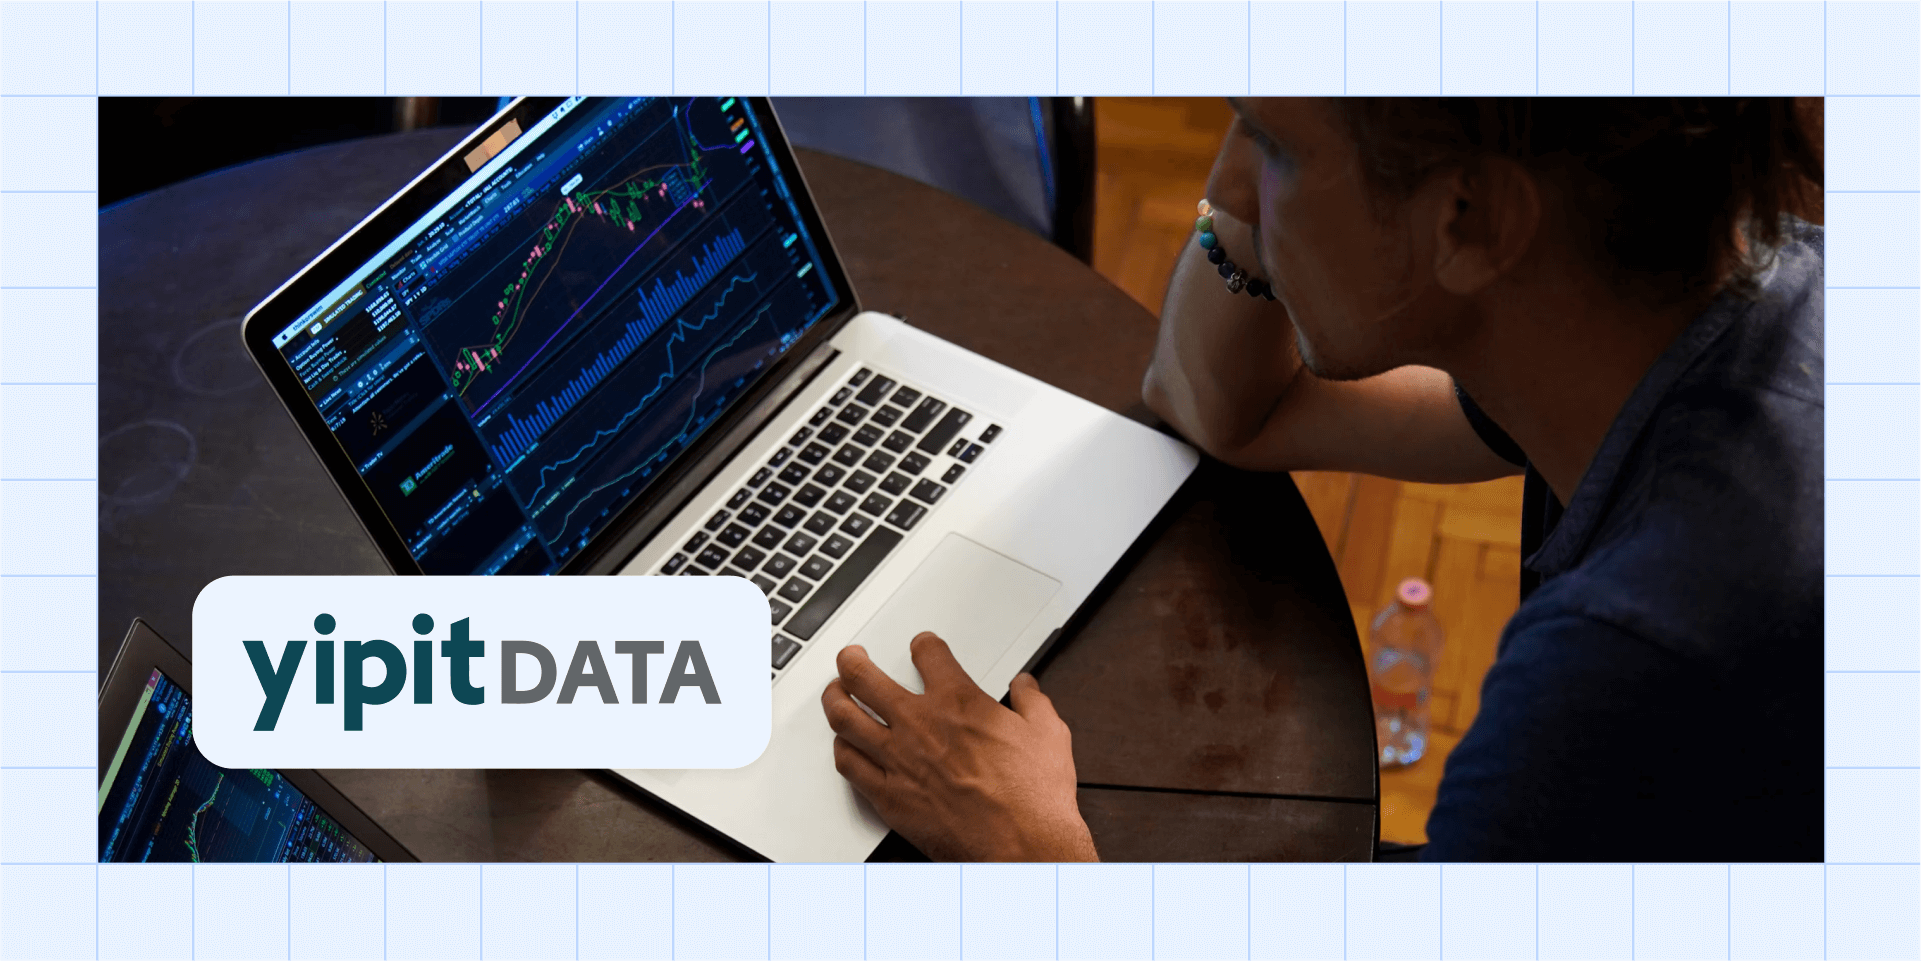 YipitData transforms financial market data overload into insights